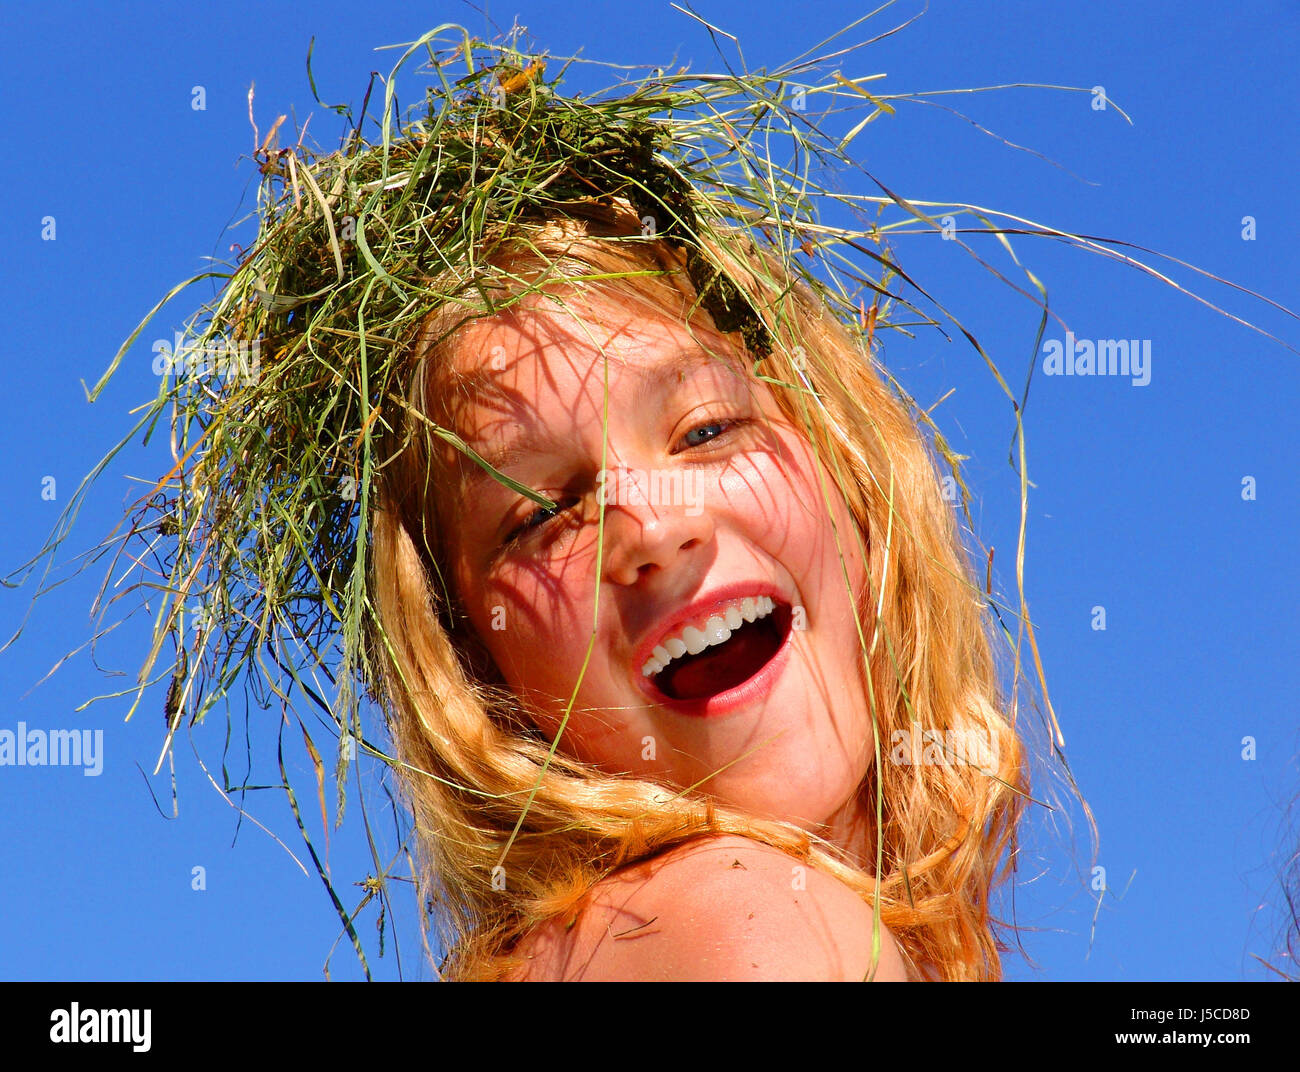 blue laugh laughs laughing twit giggle smile smiling laughter laughingly Stock Photo